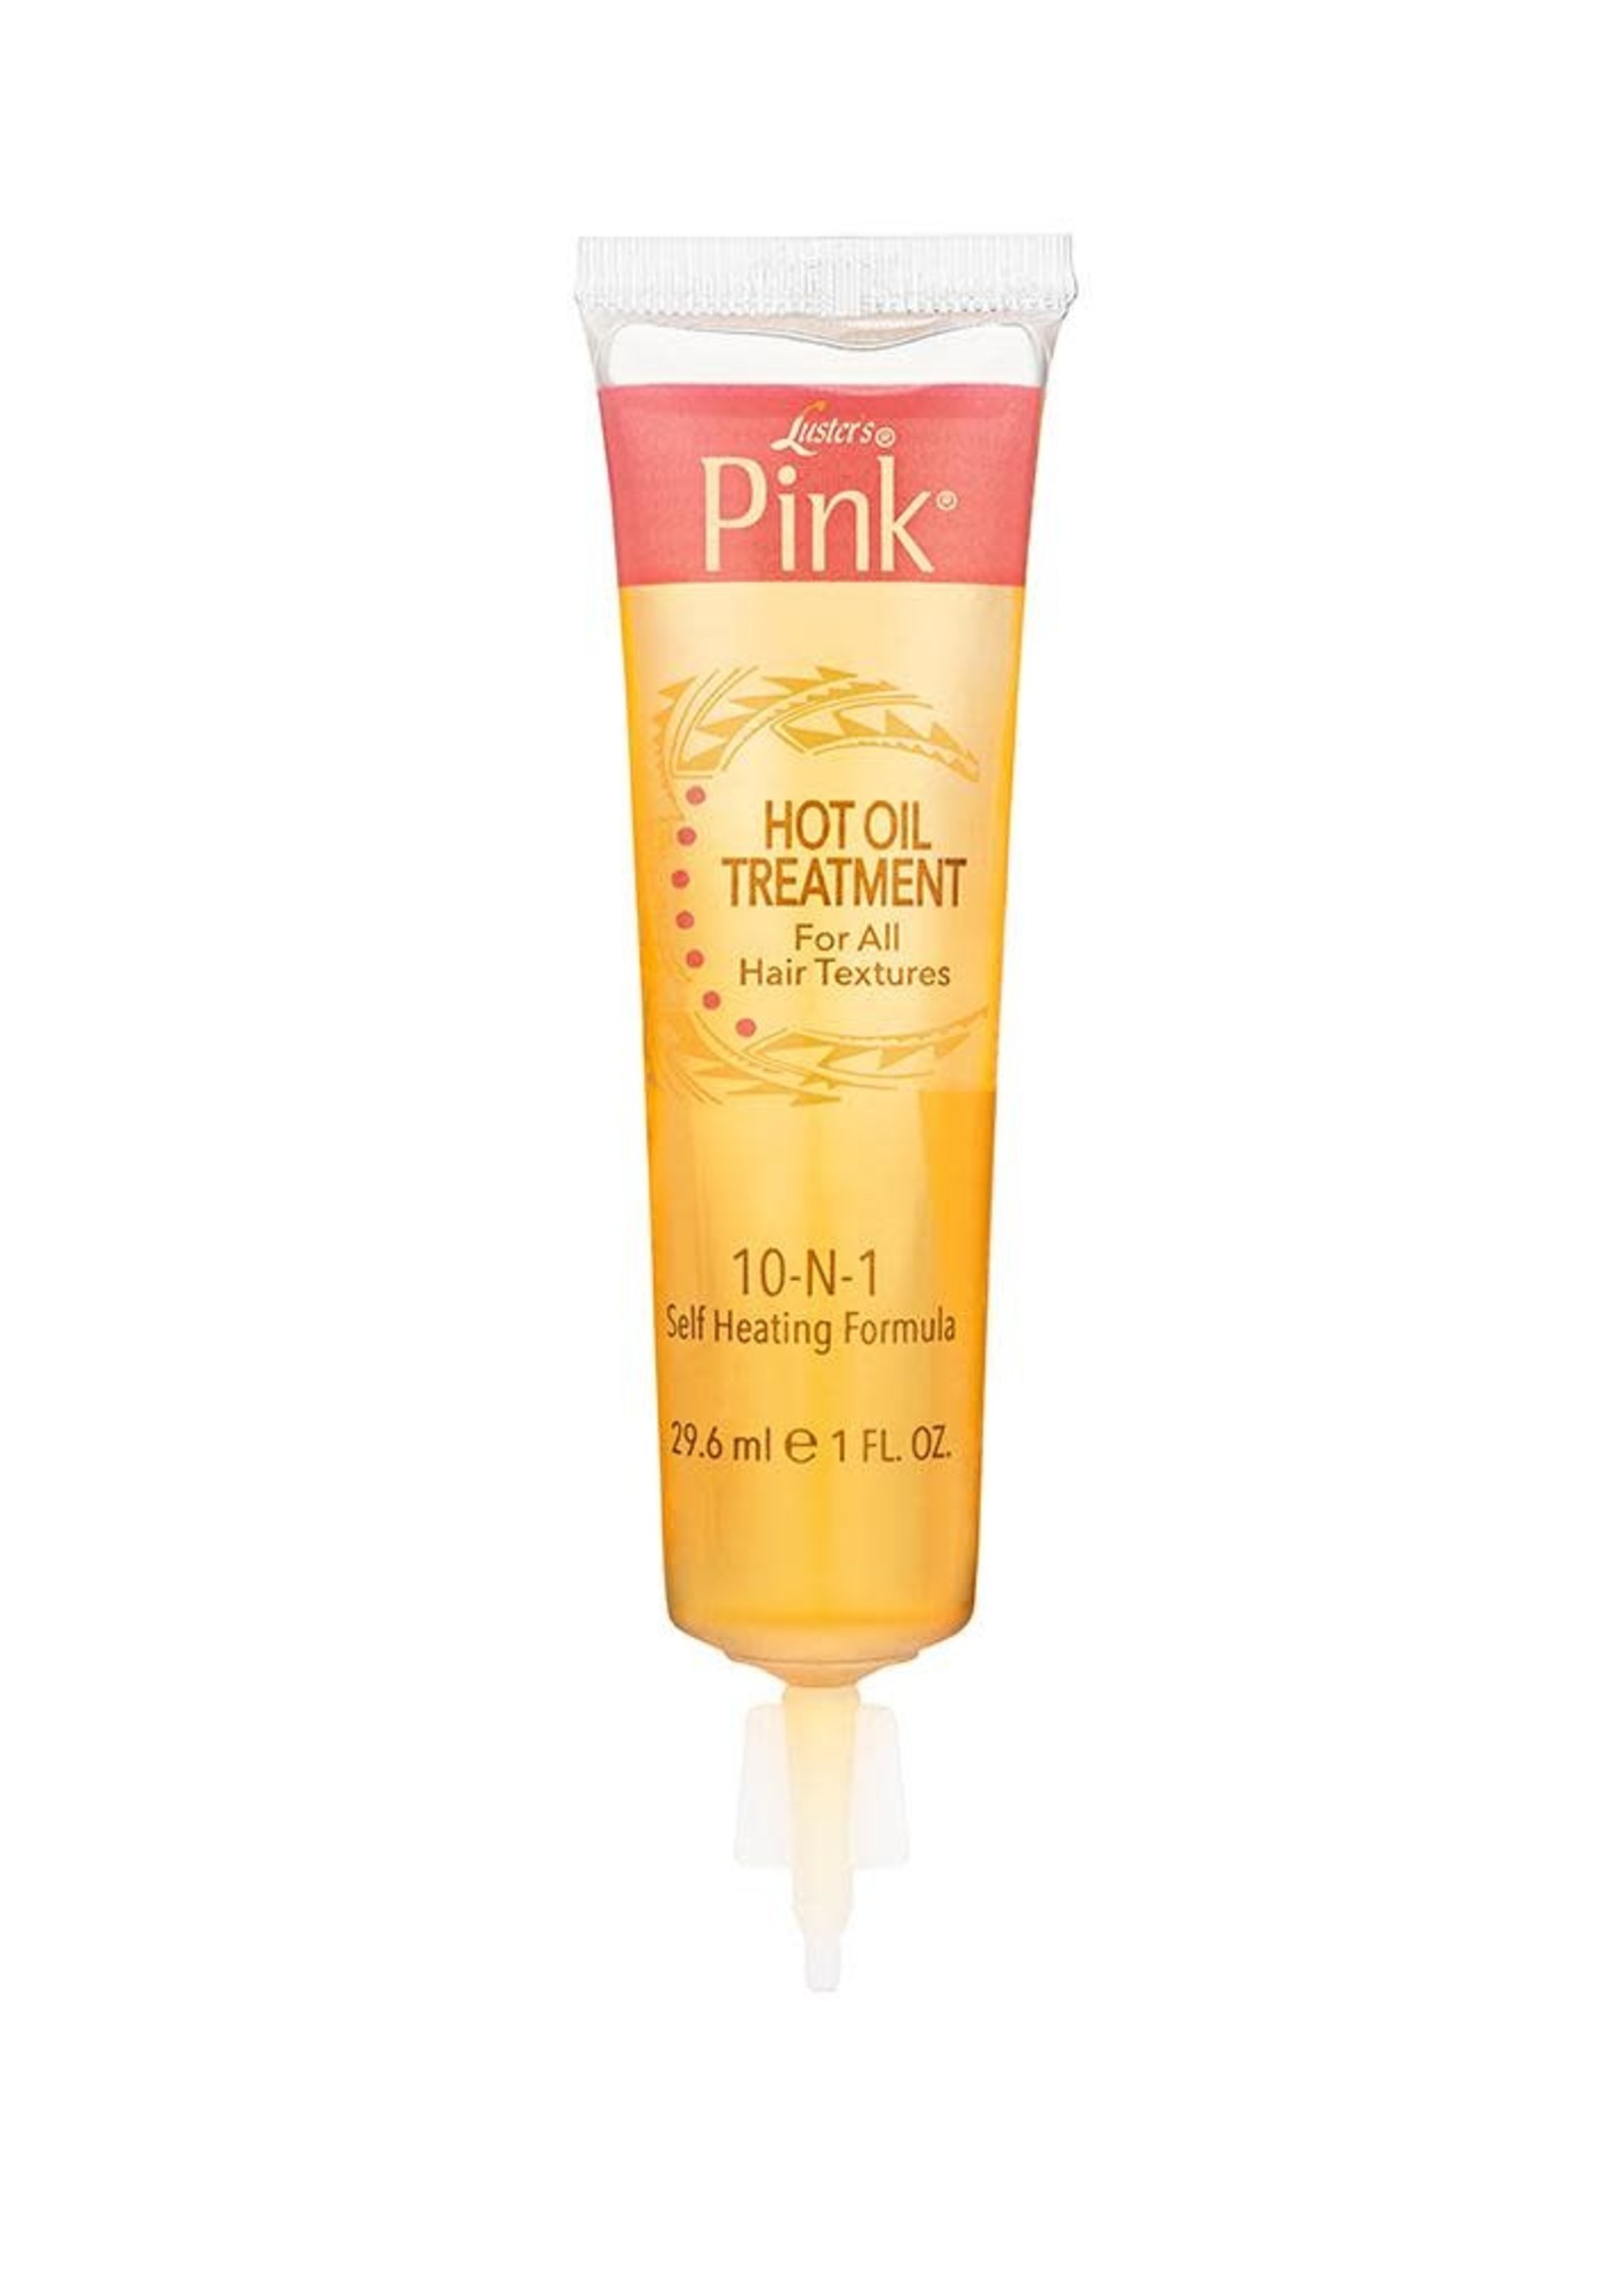 Luster's Pink Hot Oil Treatment